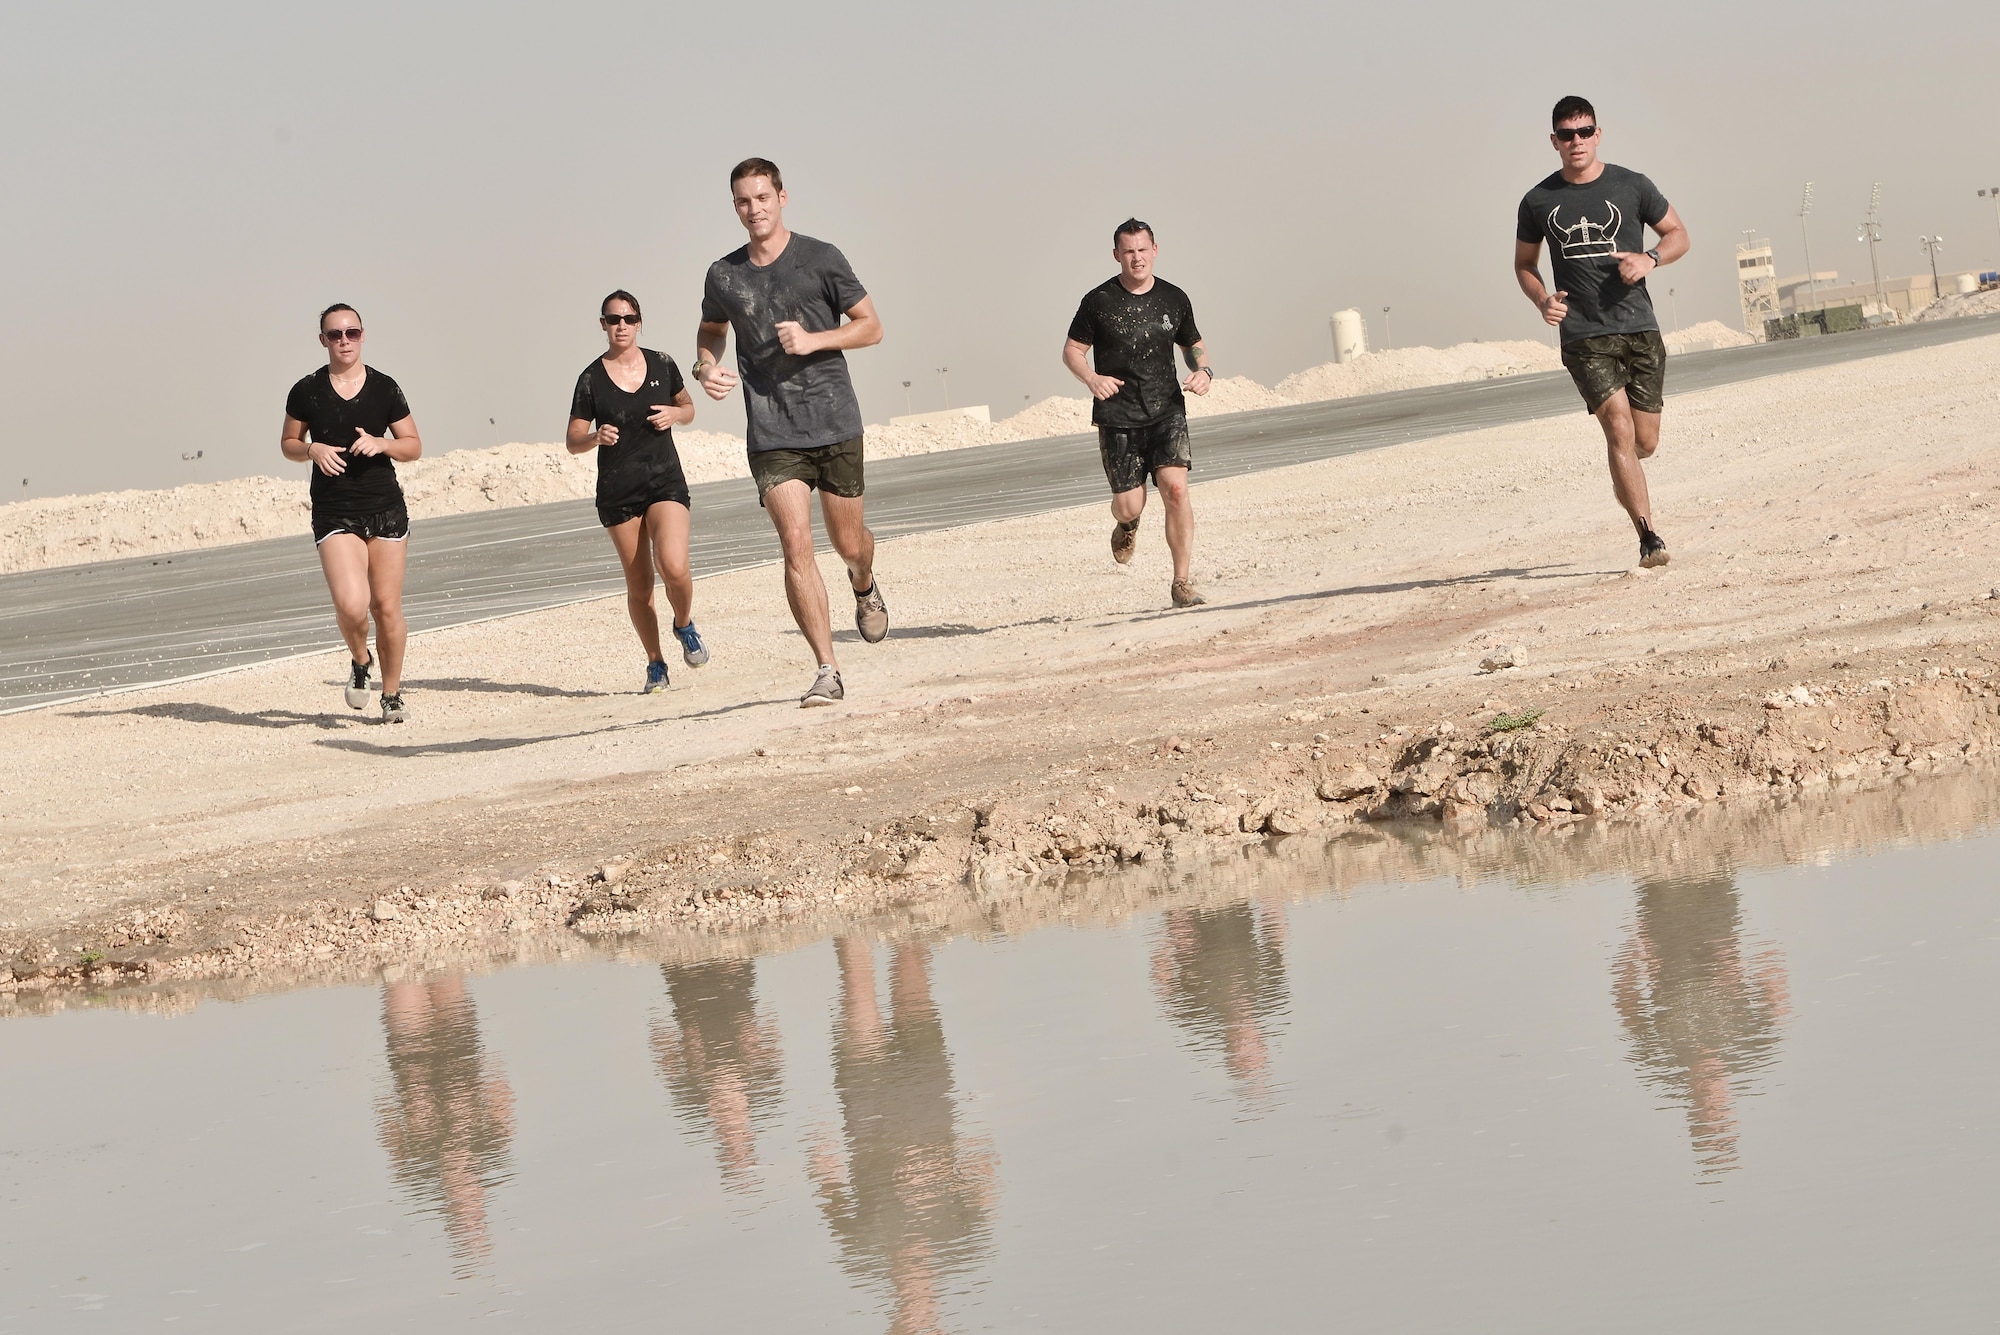 Teams were given their final times as they entered a mud pool at the end of the Diversity Day mud run September 20, 2015 at Al Udeid Air Base, Qatar. The mud run challenged 106 runners with a two mile course that contained several obstacles from low crawling, T-wall climbing, barrier hurdles, and a Ôdeep freezeÕ cold mud pool. The event was held to help spread the word of Diversity Day, an initiative started by the Department of Defense for diversity events held throughout the year. (U.S. Air Force photo/ Staff Sgt. Alexandre Montes)  